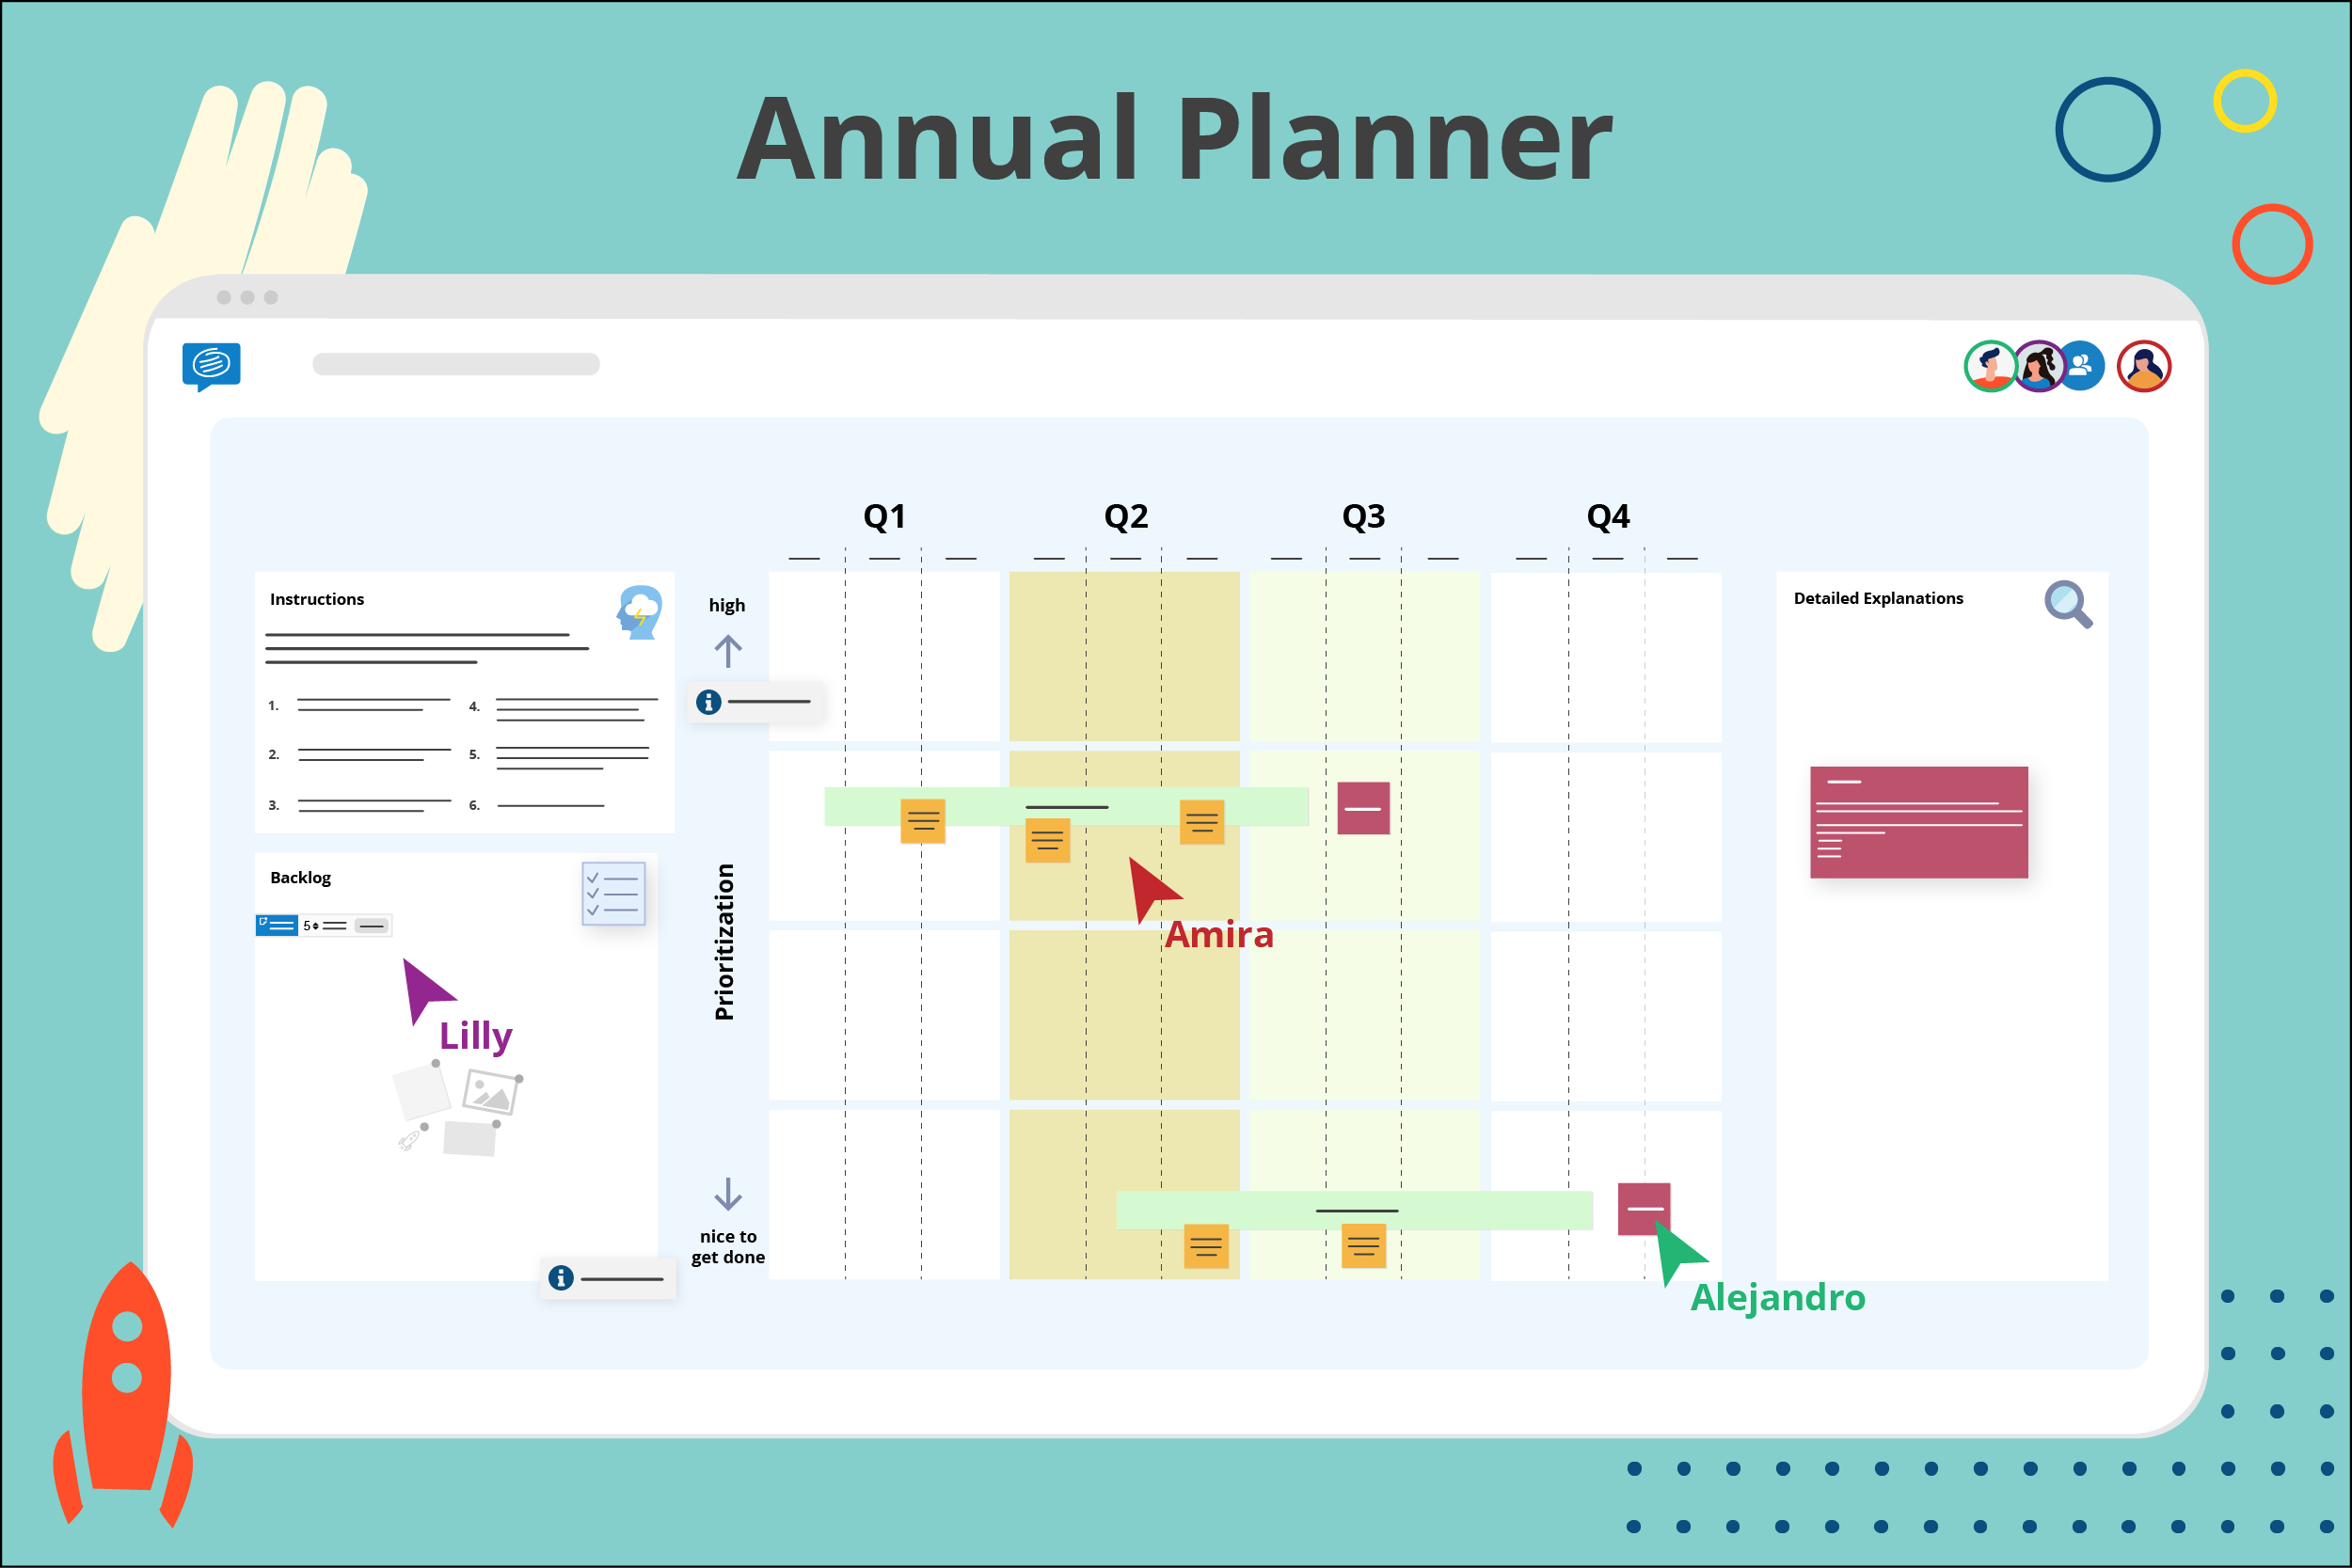 Image of an Annual Planner template